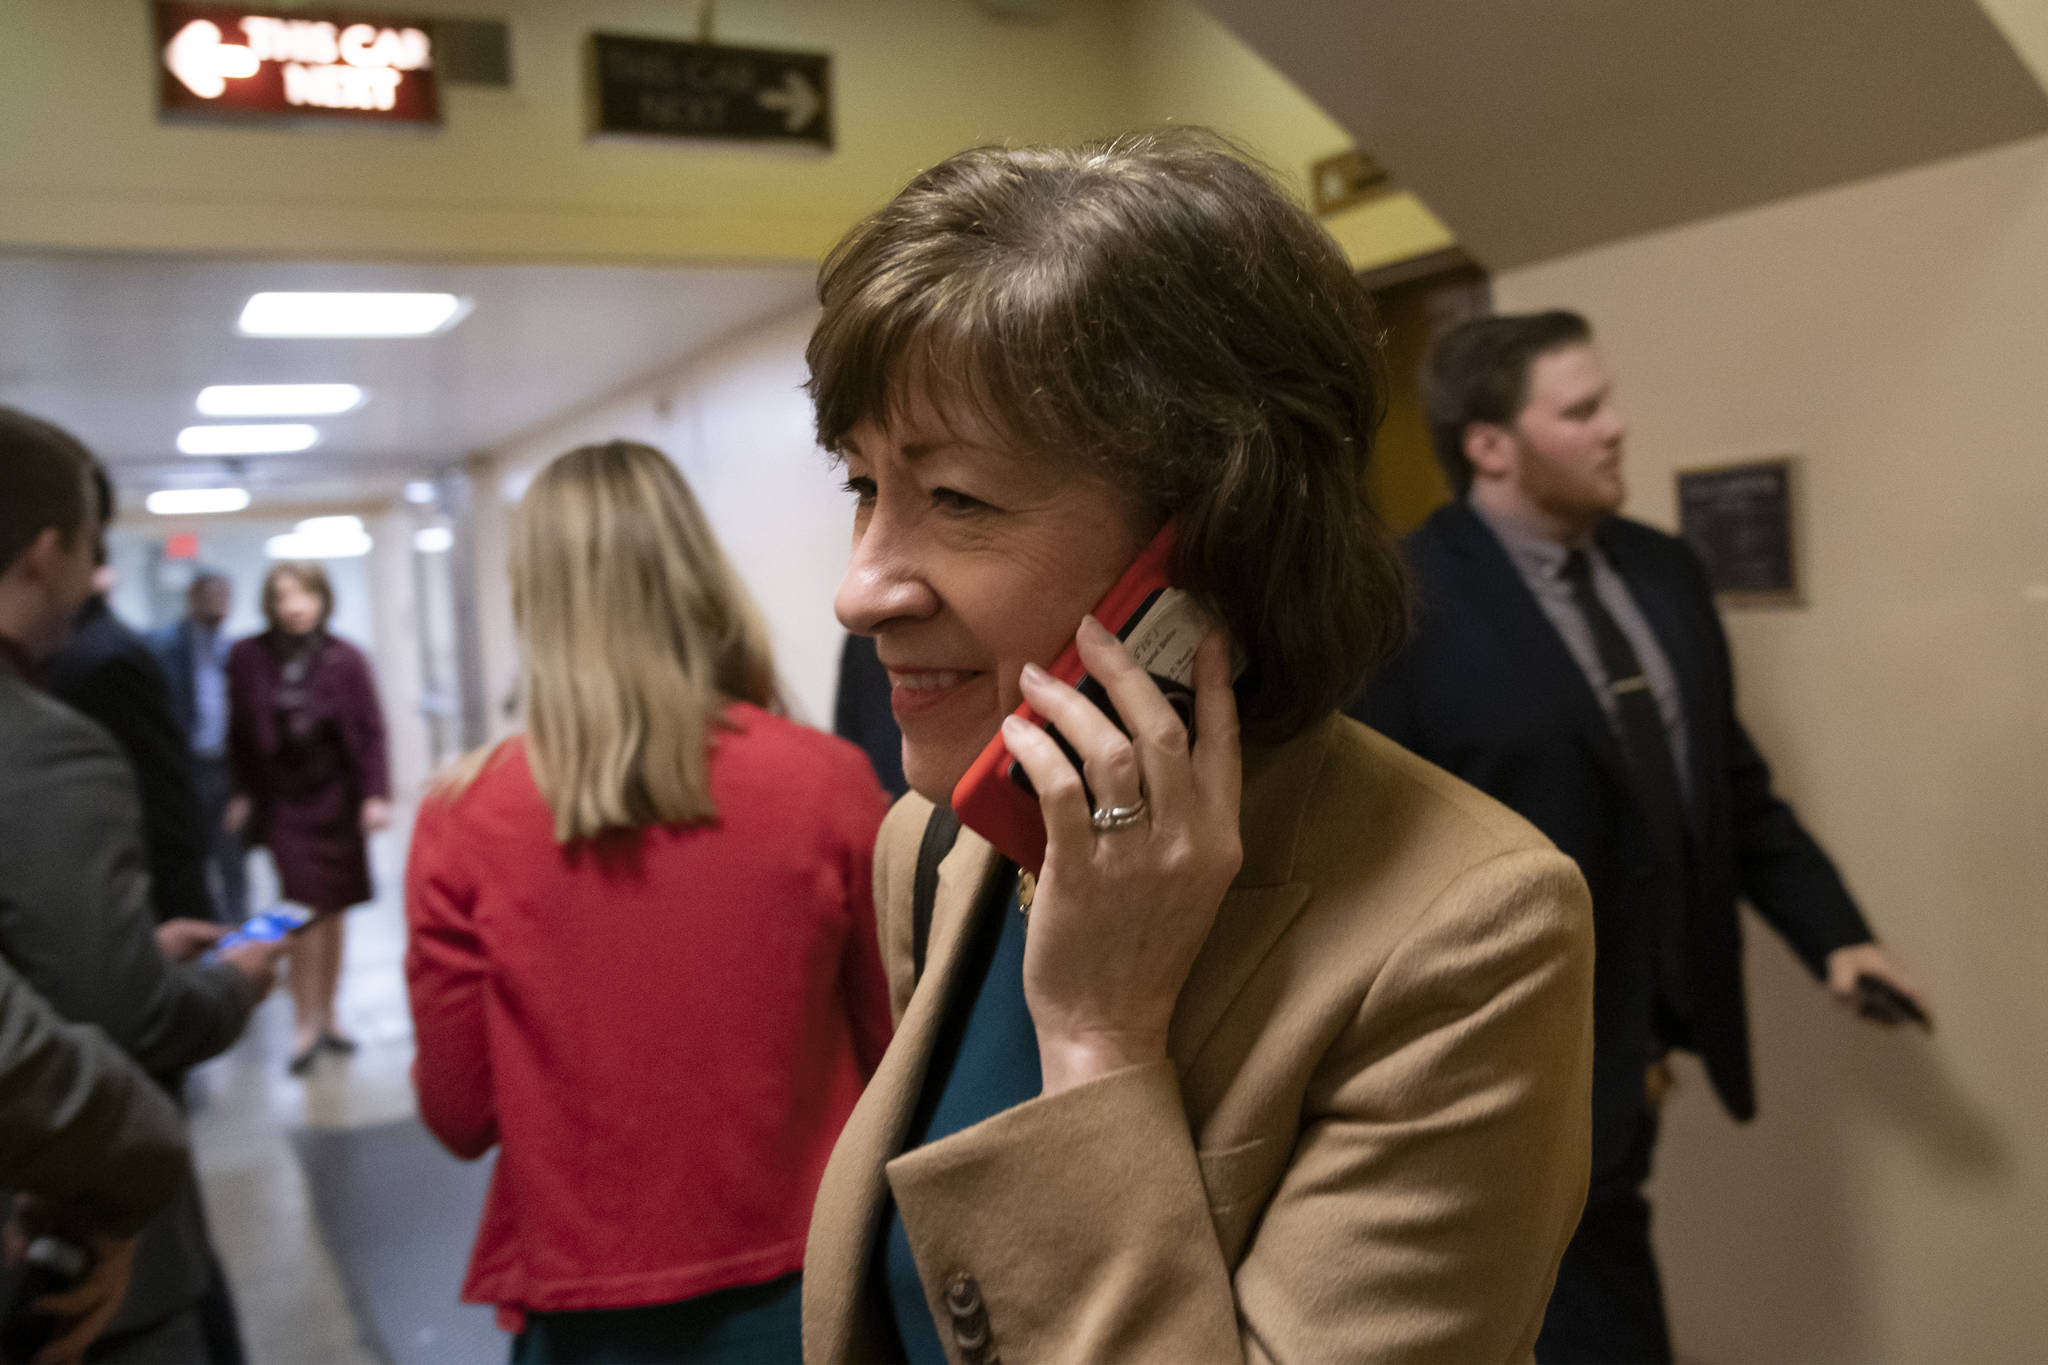 Sen. Susan Collins, R-Maine, arrives in the Senate where she has said she will vote for a resolution to annul President Donald Trump’s declaration of a national emergency at the southwest border, on Capitol Hill in Washington, Thursday, March 14, 2019. (AP Photo/J. Scott Applewhite)